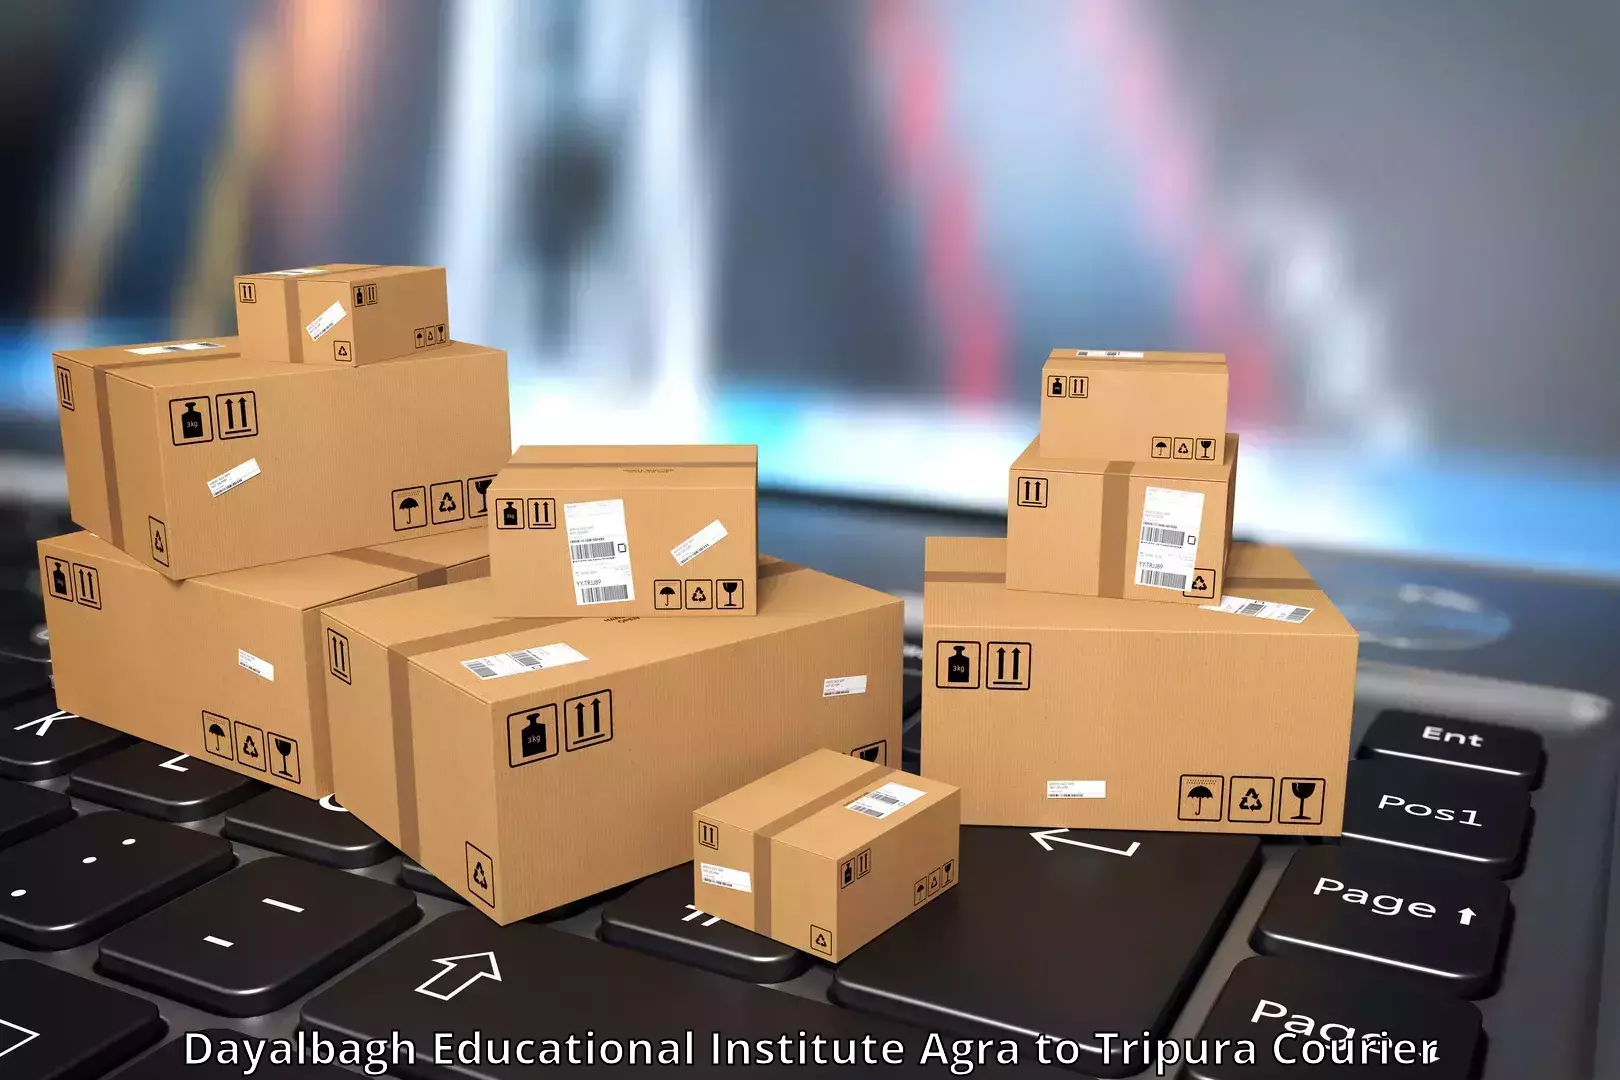 Innovative logistics solutions Dayalbagh Educational Institute Agra to Aambasa